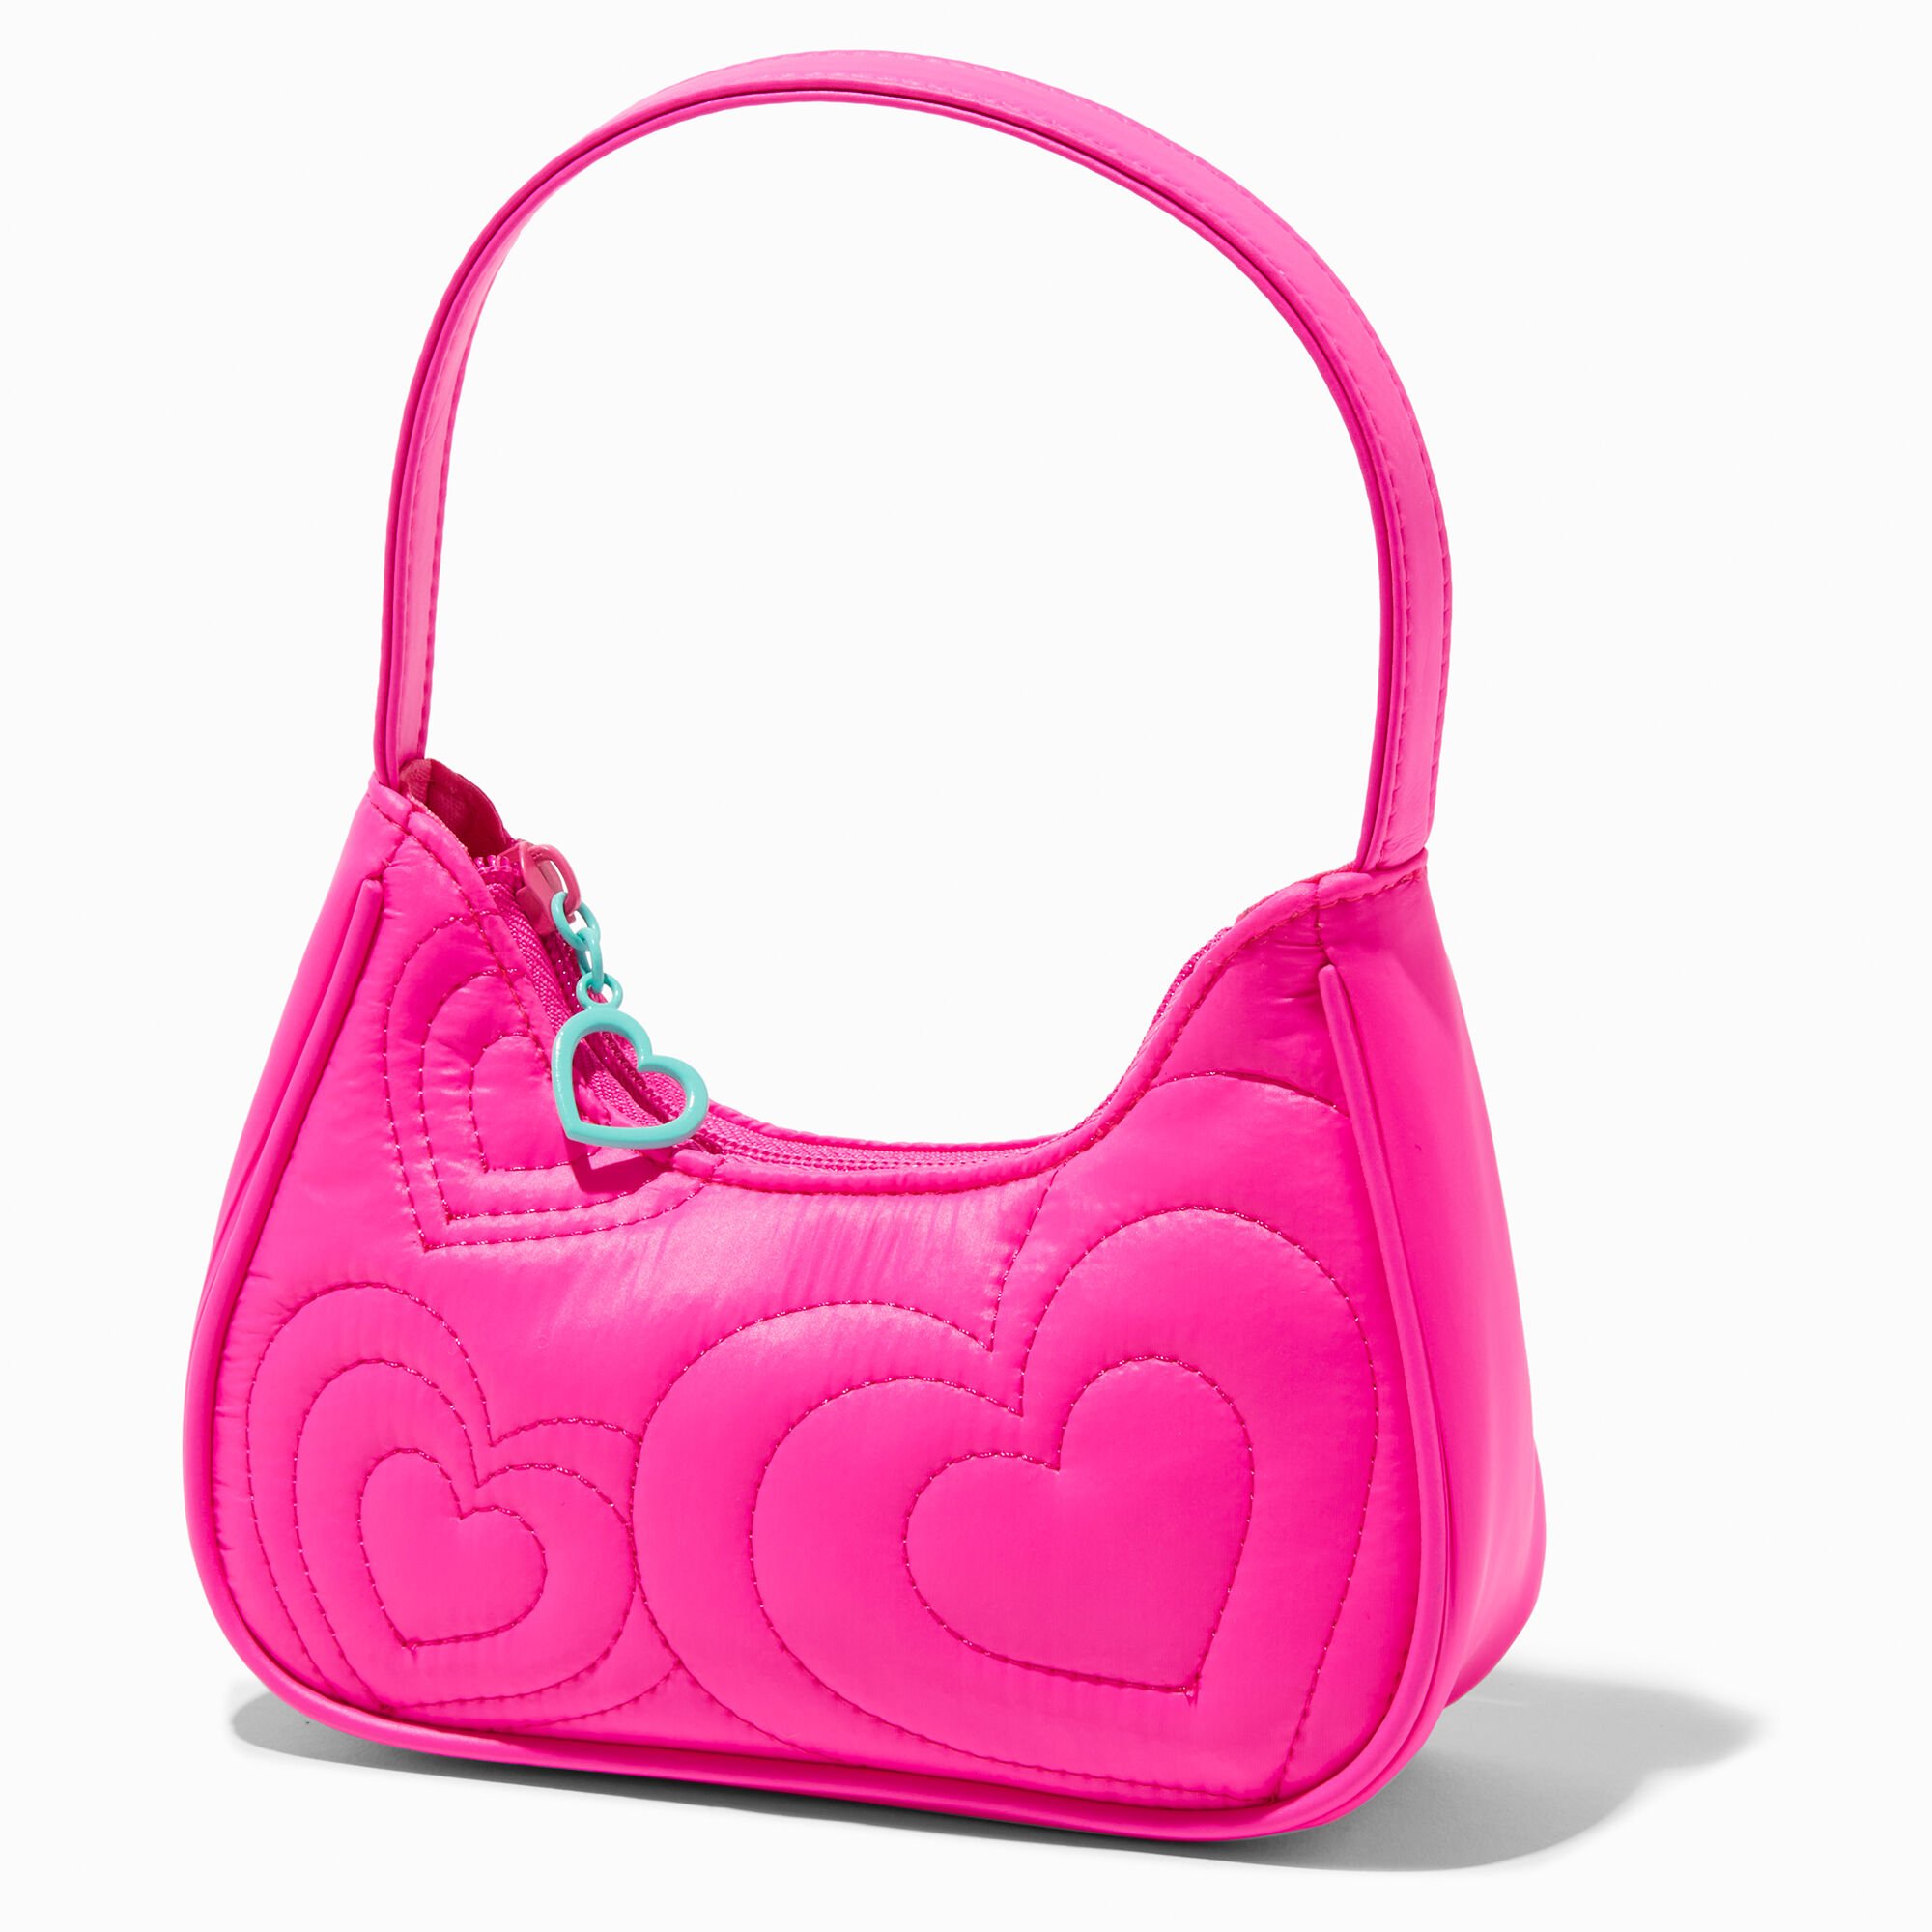 View Claires Club Quilted Hearts Shoulder Bag Pink information